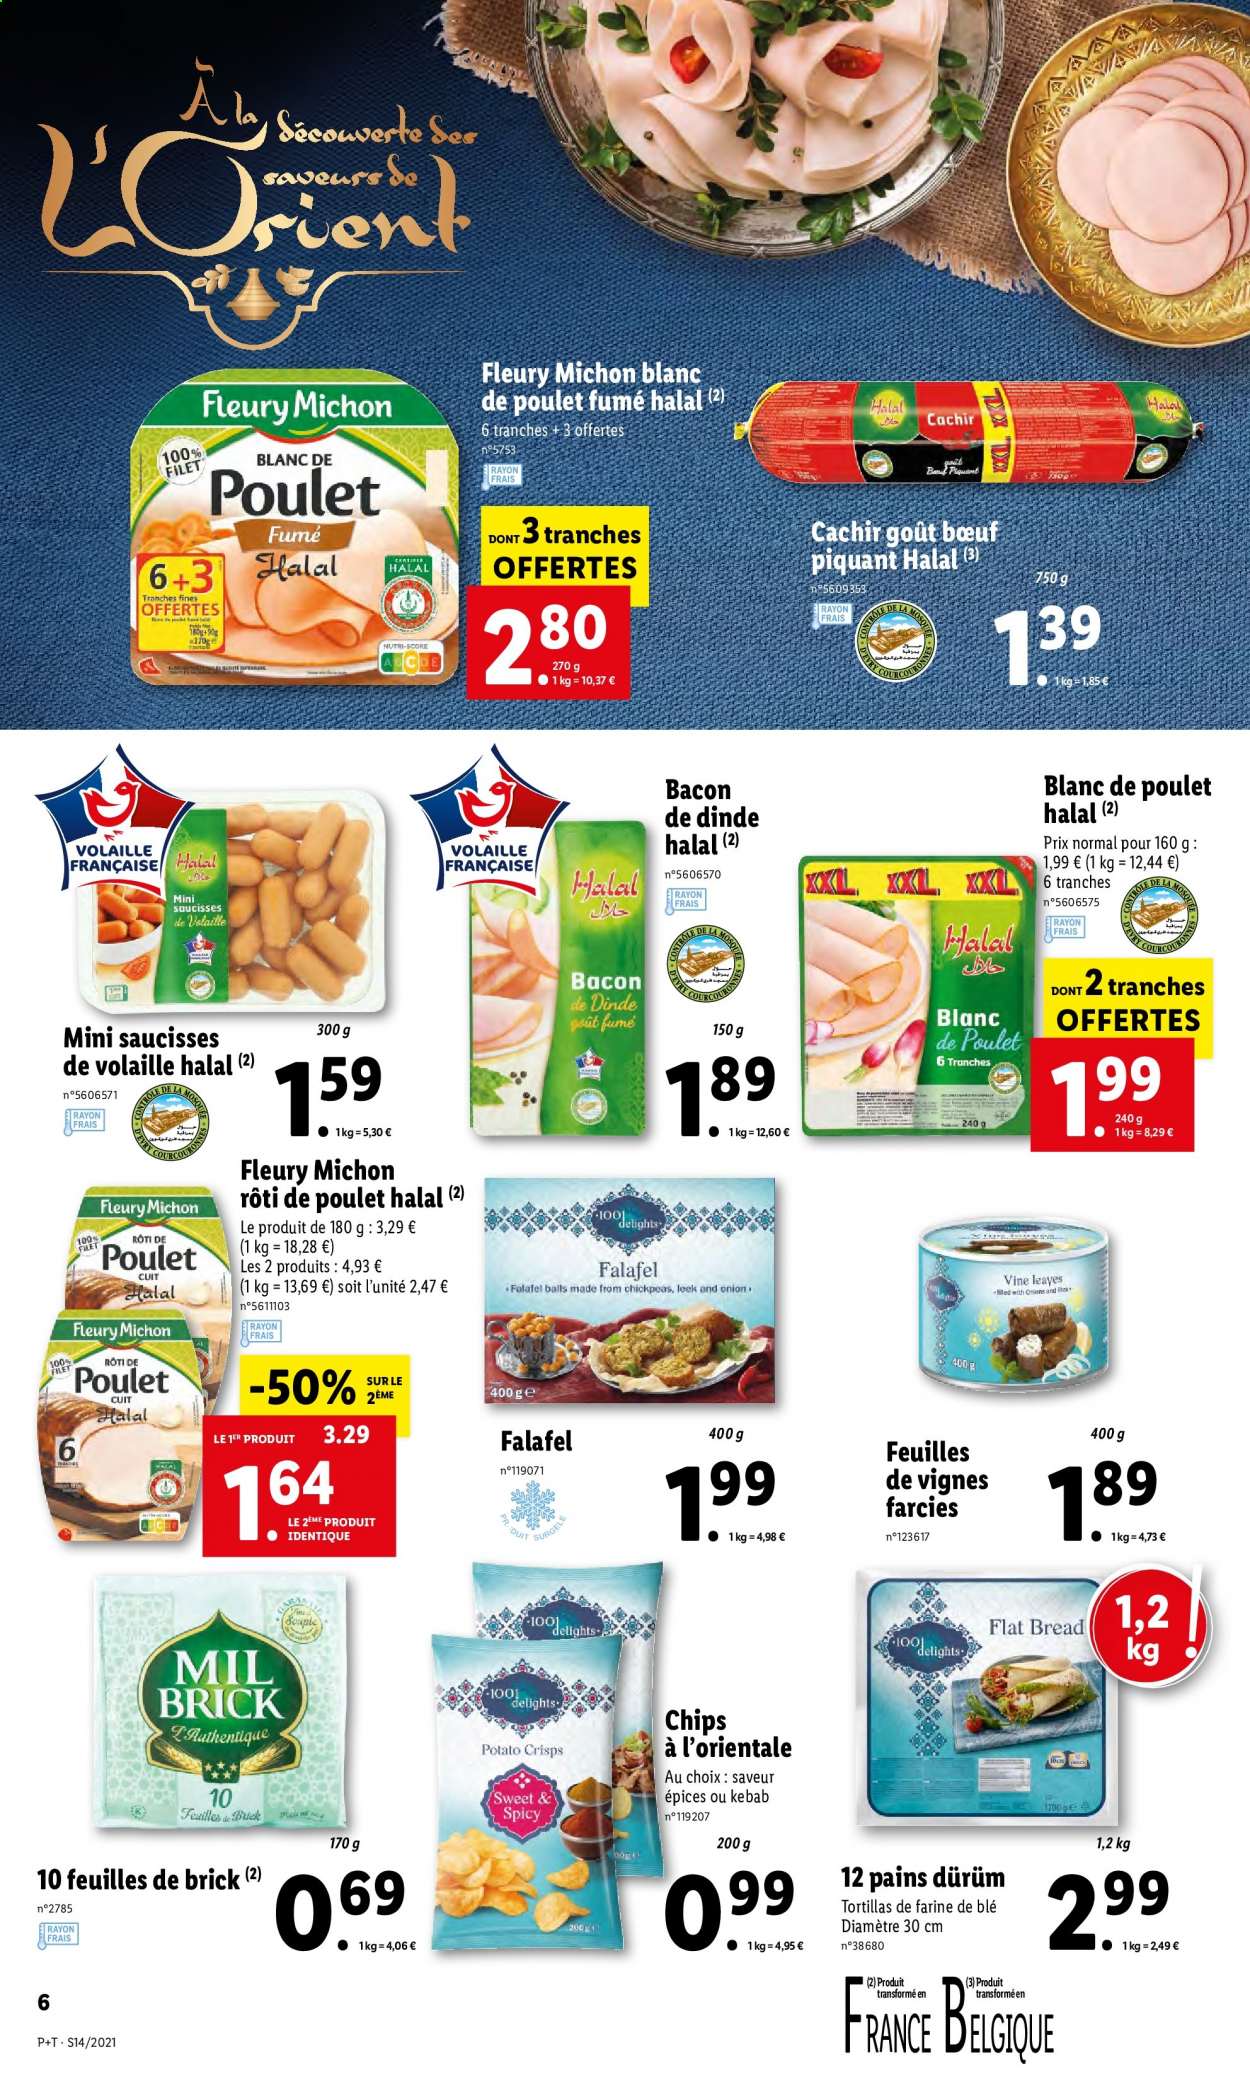 Catalogue Lidl - 07.04.2021 - 13.04.2021. Page 8.